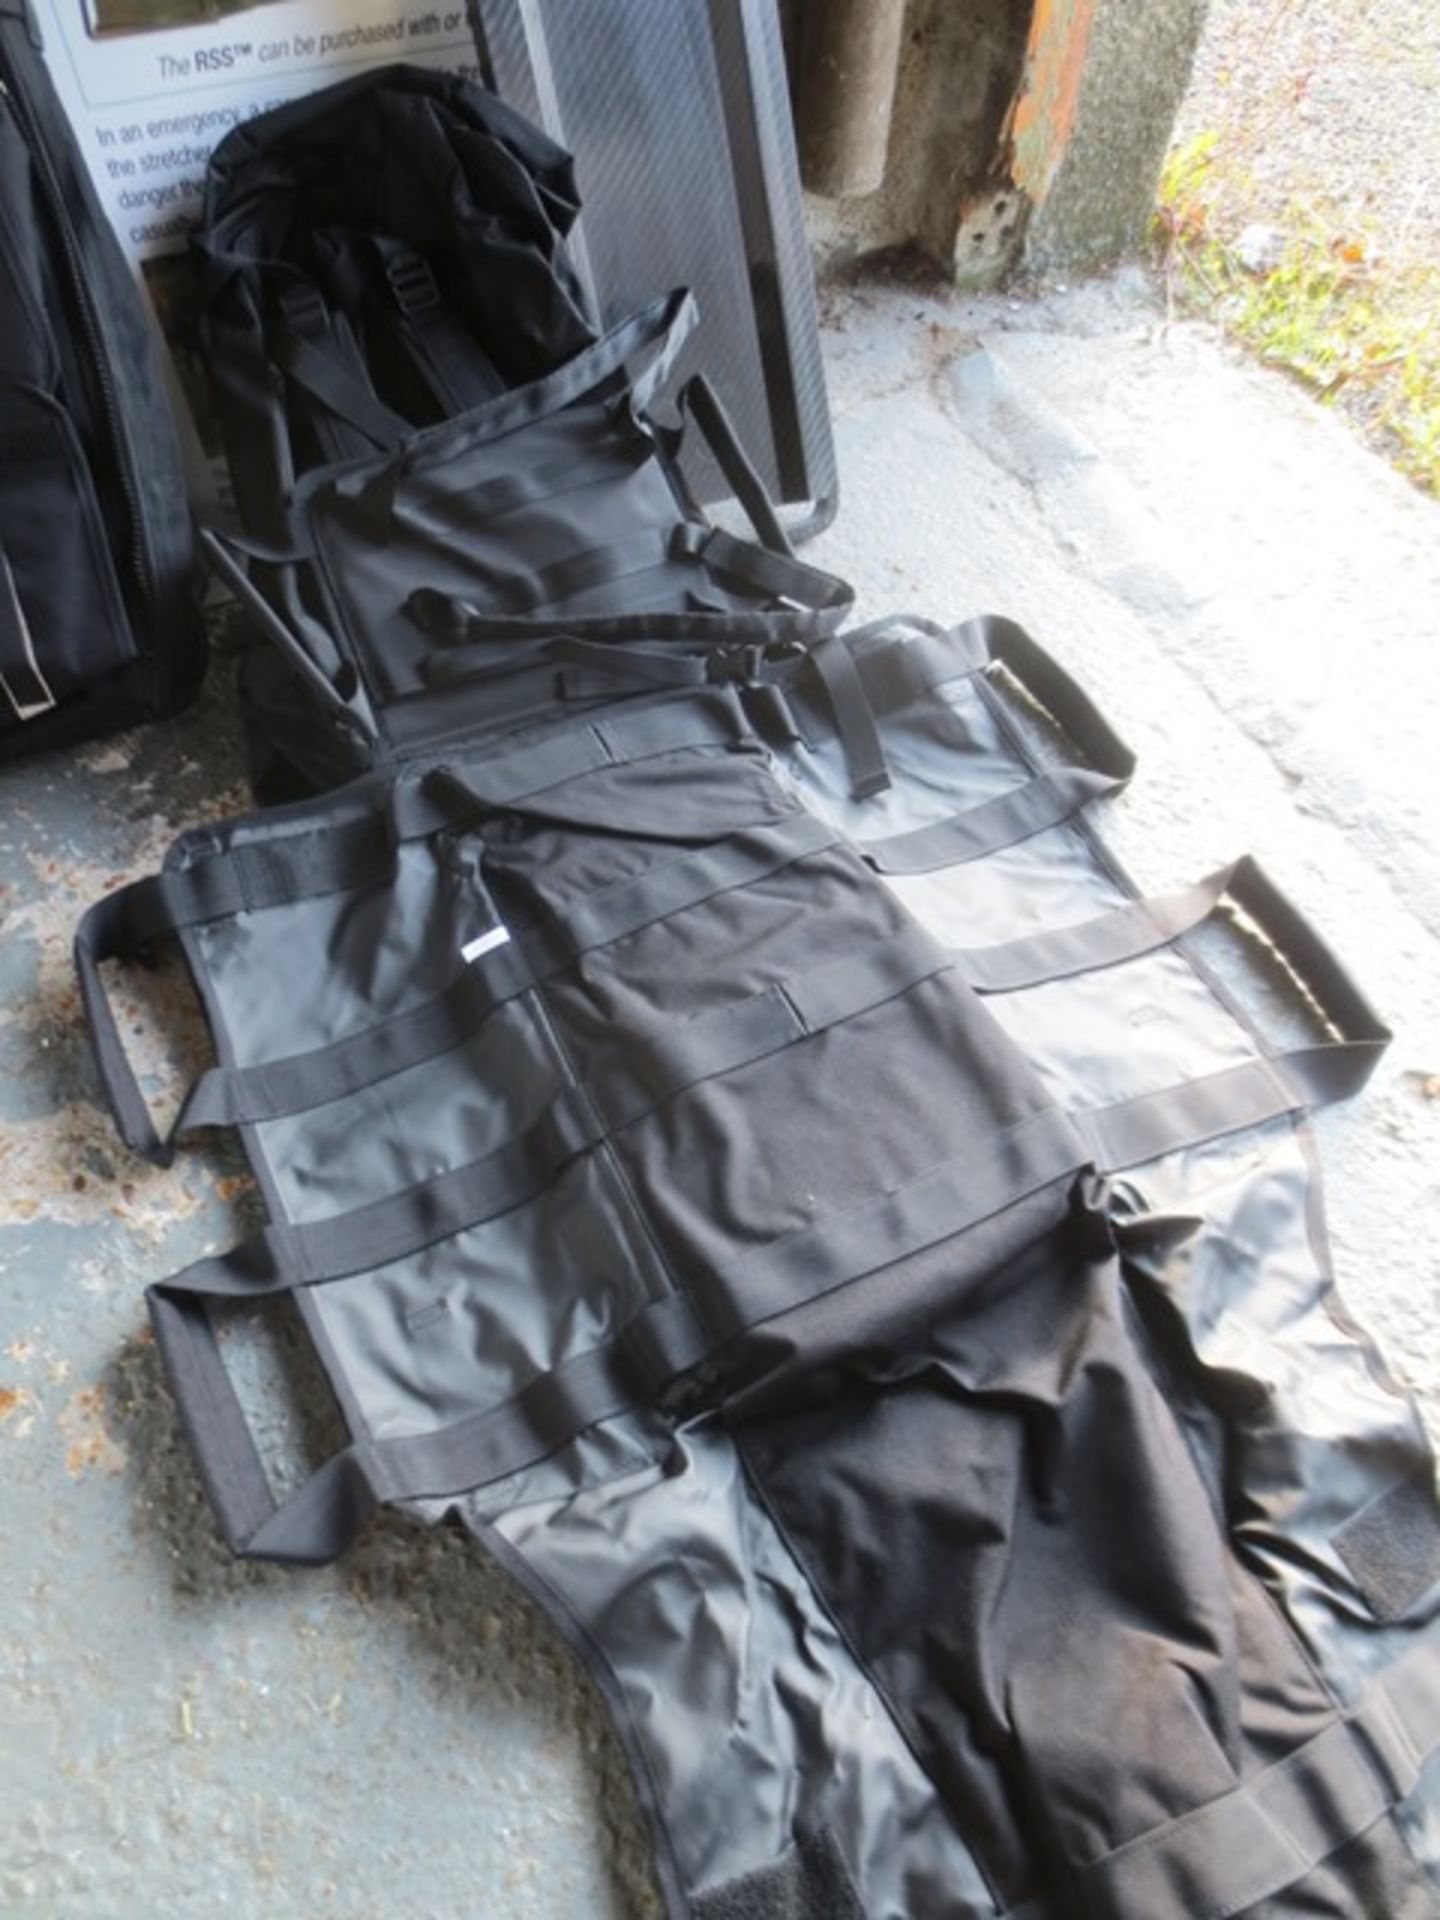 Black Rucksack Stretcher Systems (RSS) Day sack/grab bag, fold out rucksack stretcher, with - Image 4 of 9